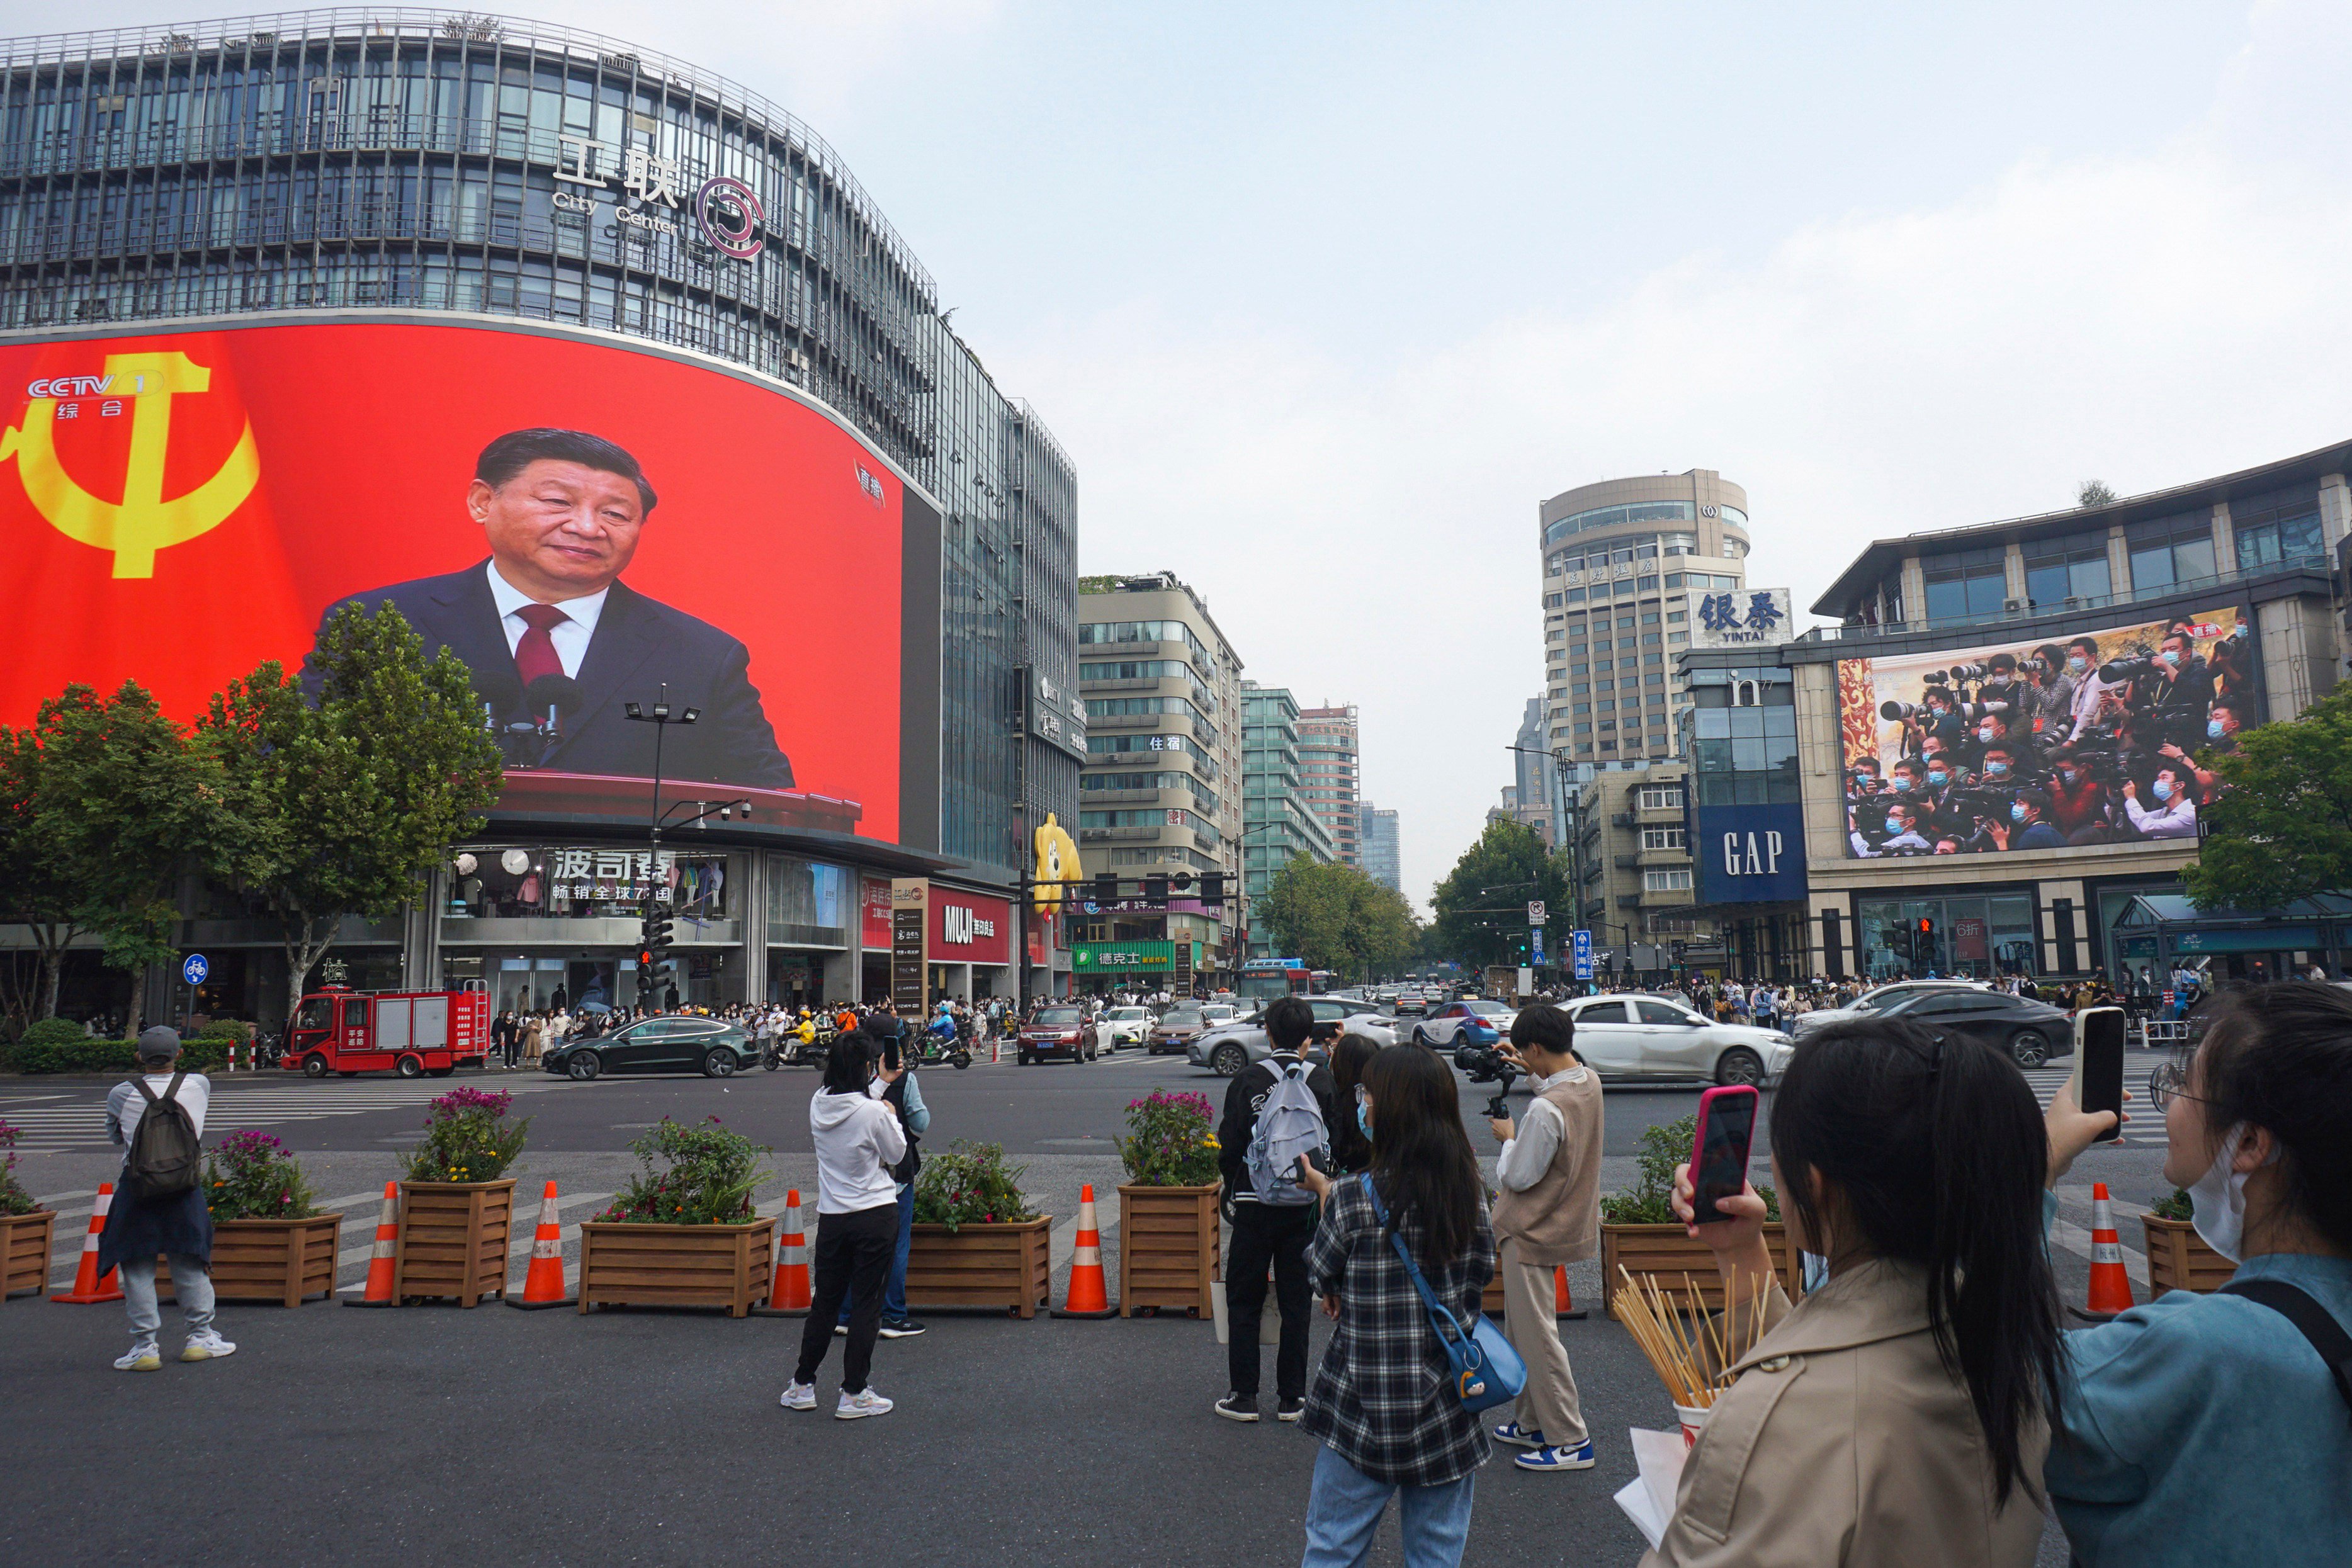 Chinese President Xi Jinping is seen at the end of the 20th party congress on a giant screen in a Hangzhou commercial district in Zhejiang province on October 23. Photo: AP